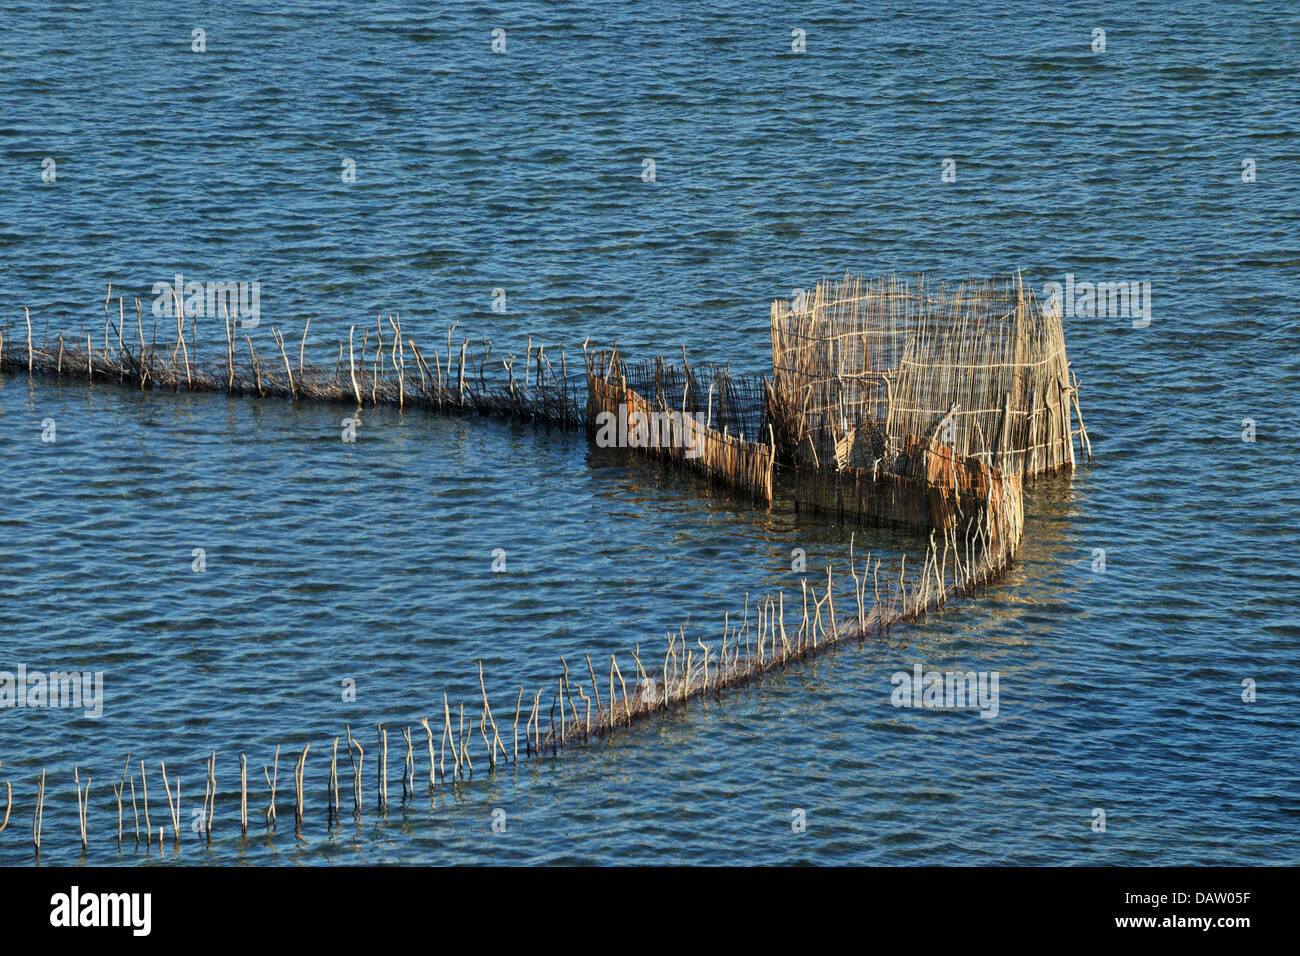 African fishtraps made of reeds at Kosi bay, Natal South Africa Stock Photo